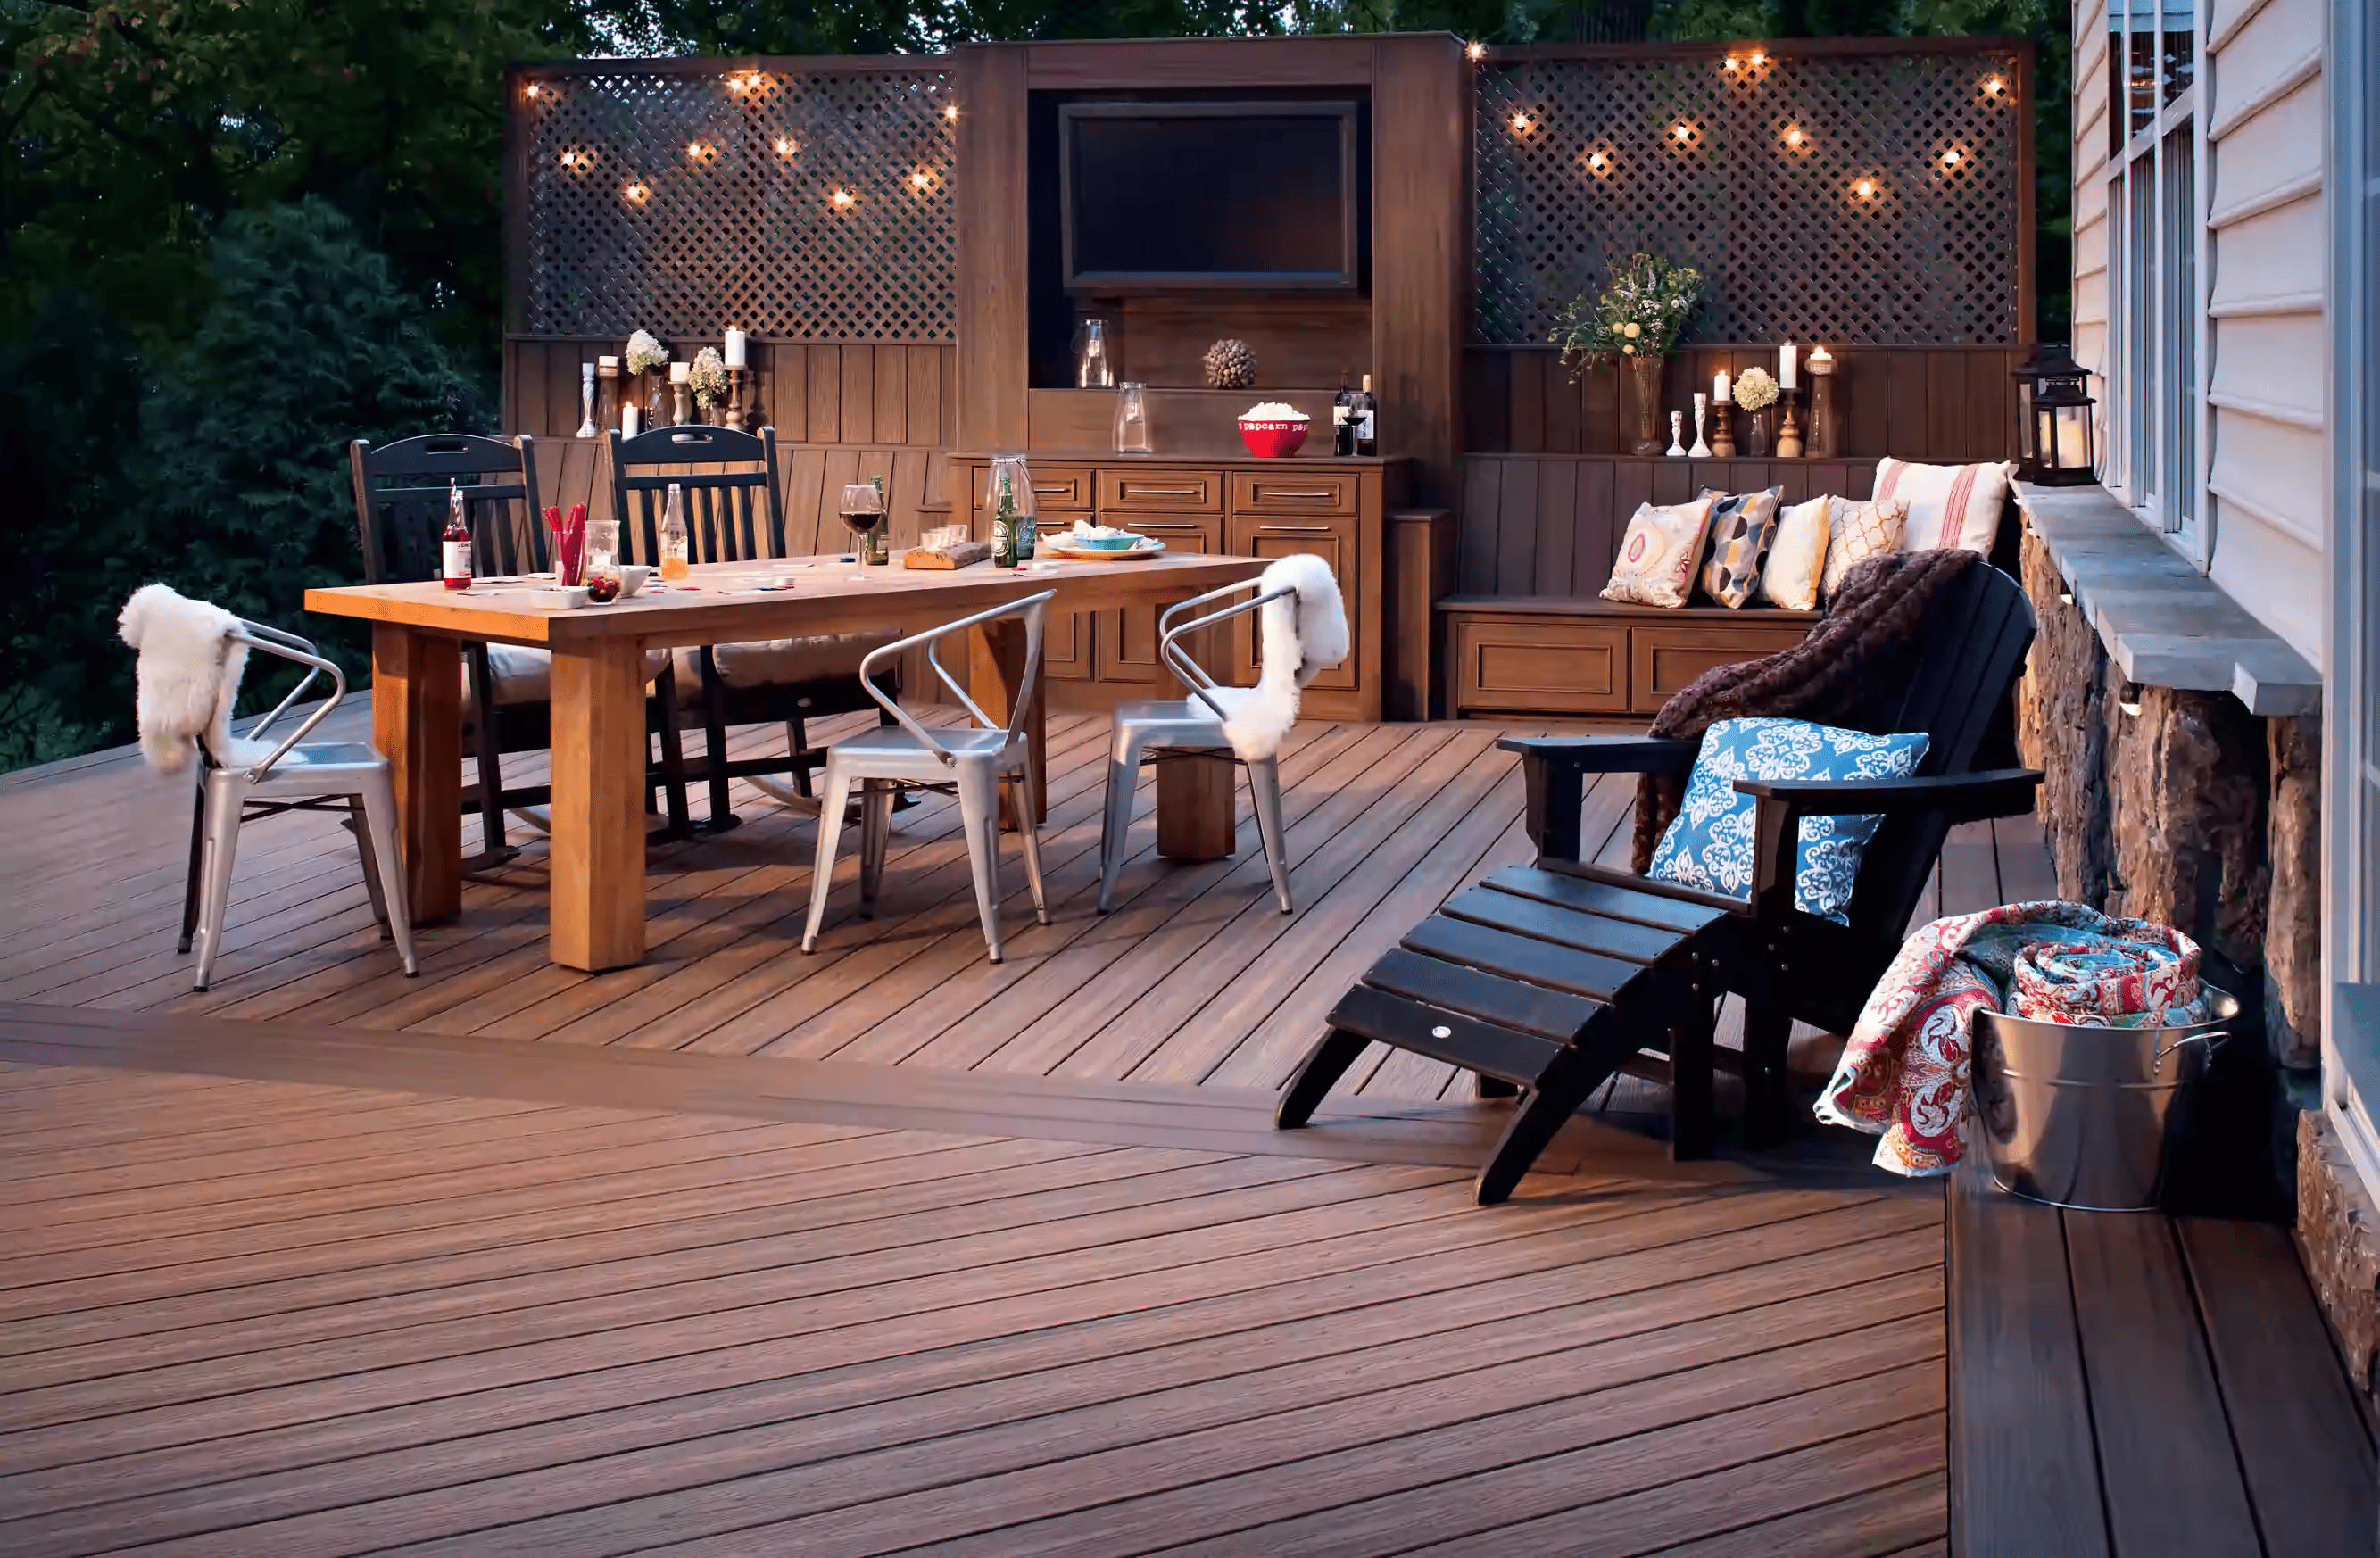 Image of brown dining table on brown deck with hanging lights.